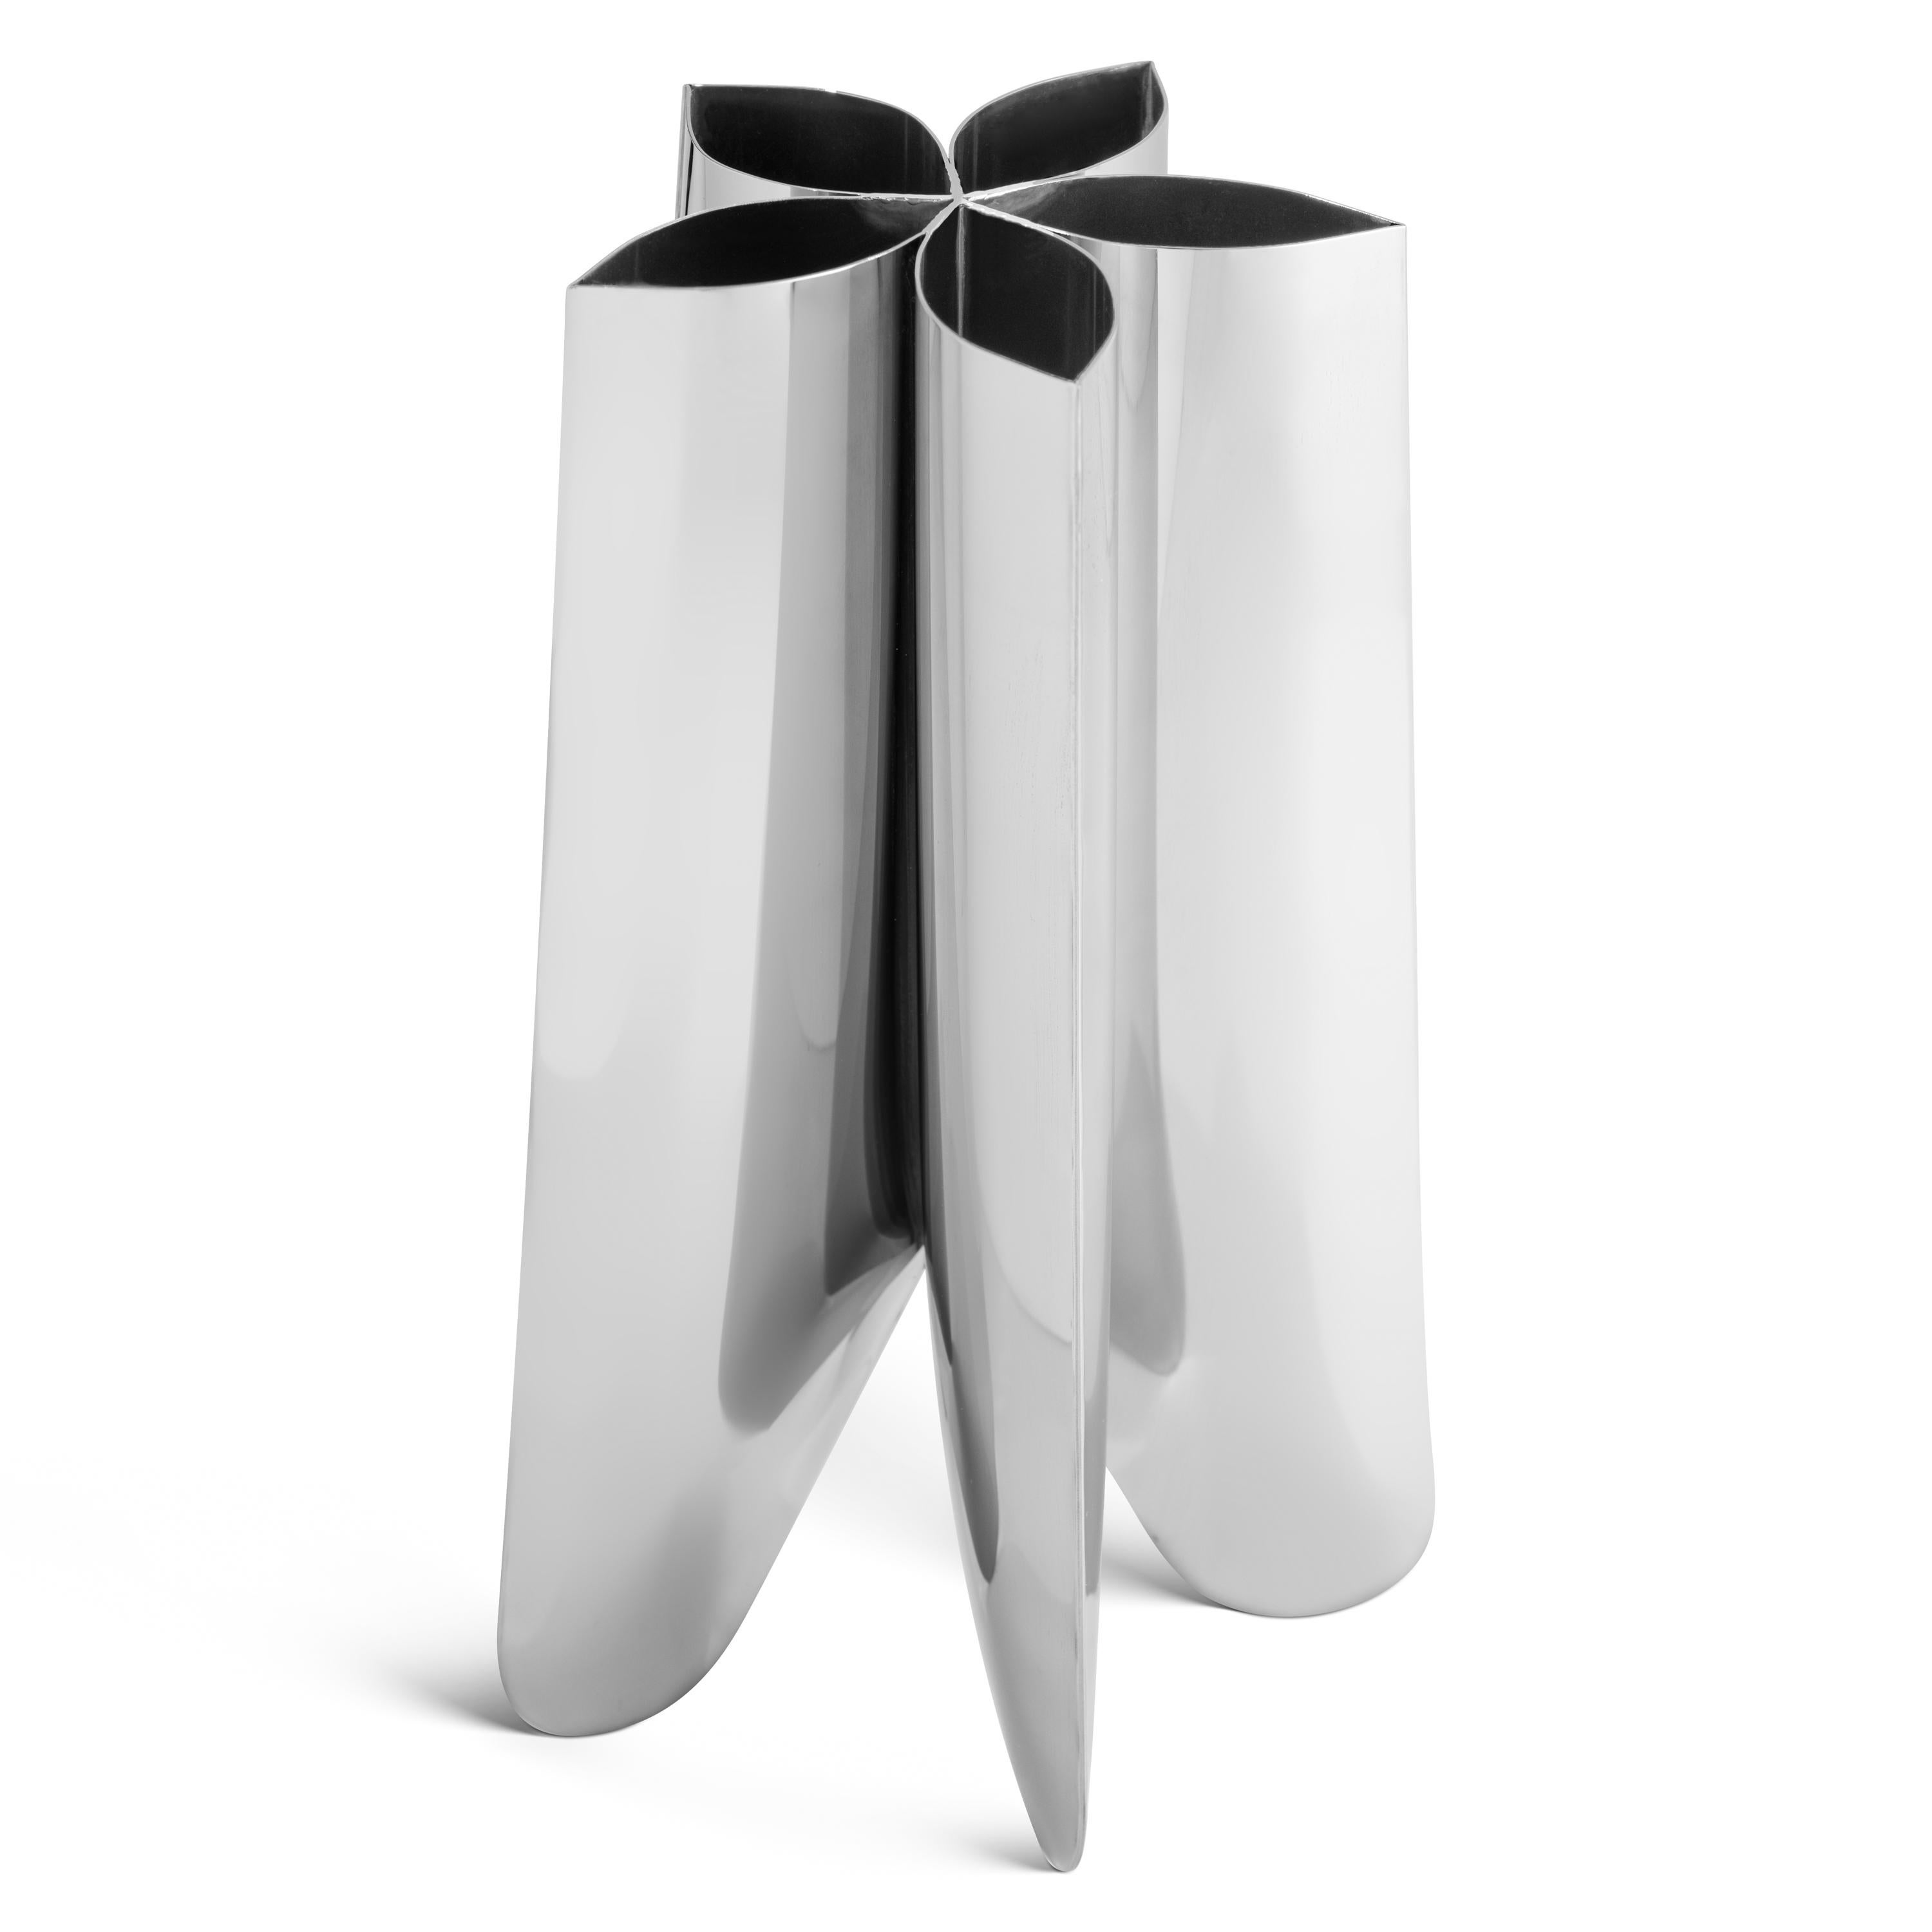 Contemporary Vase, 'Rotation Vase' by Zieta, Small, Stainless Steel In New Condition For Sale In Paris, FR